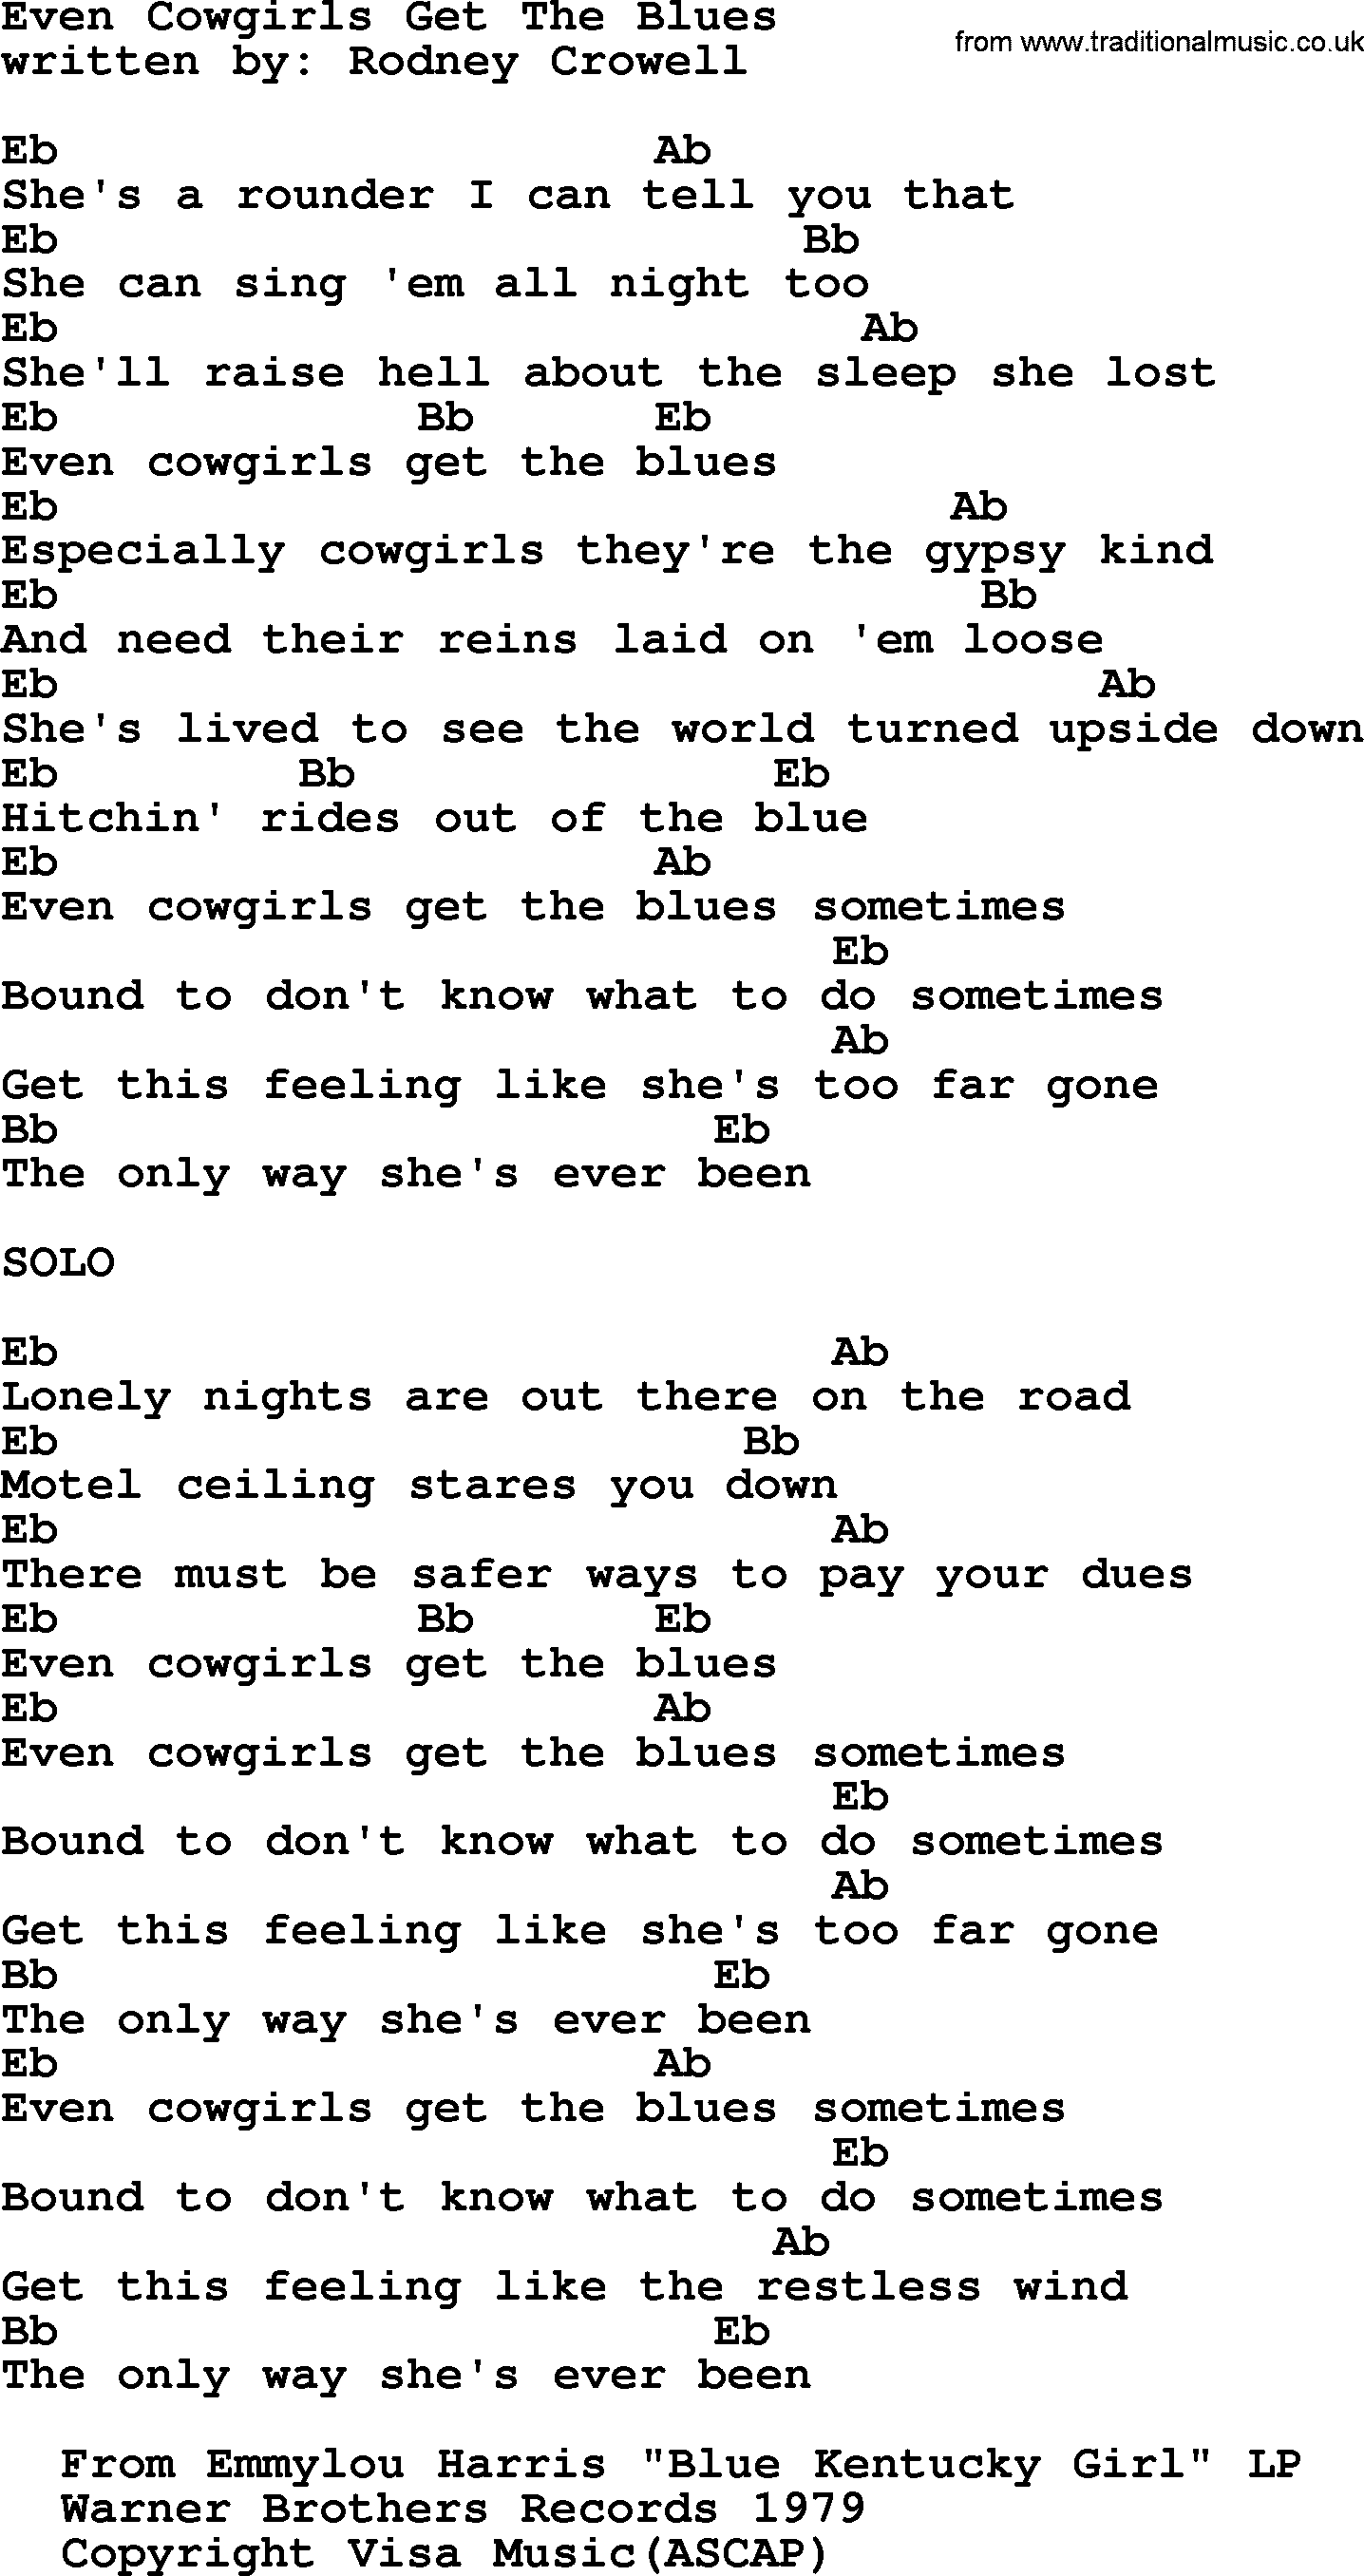 Emmylou Harris song: Even Cowgirls Get The Blues lyrics and chords